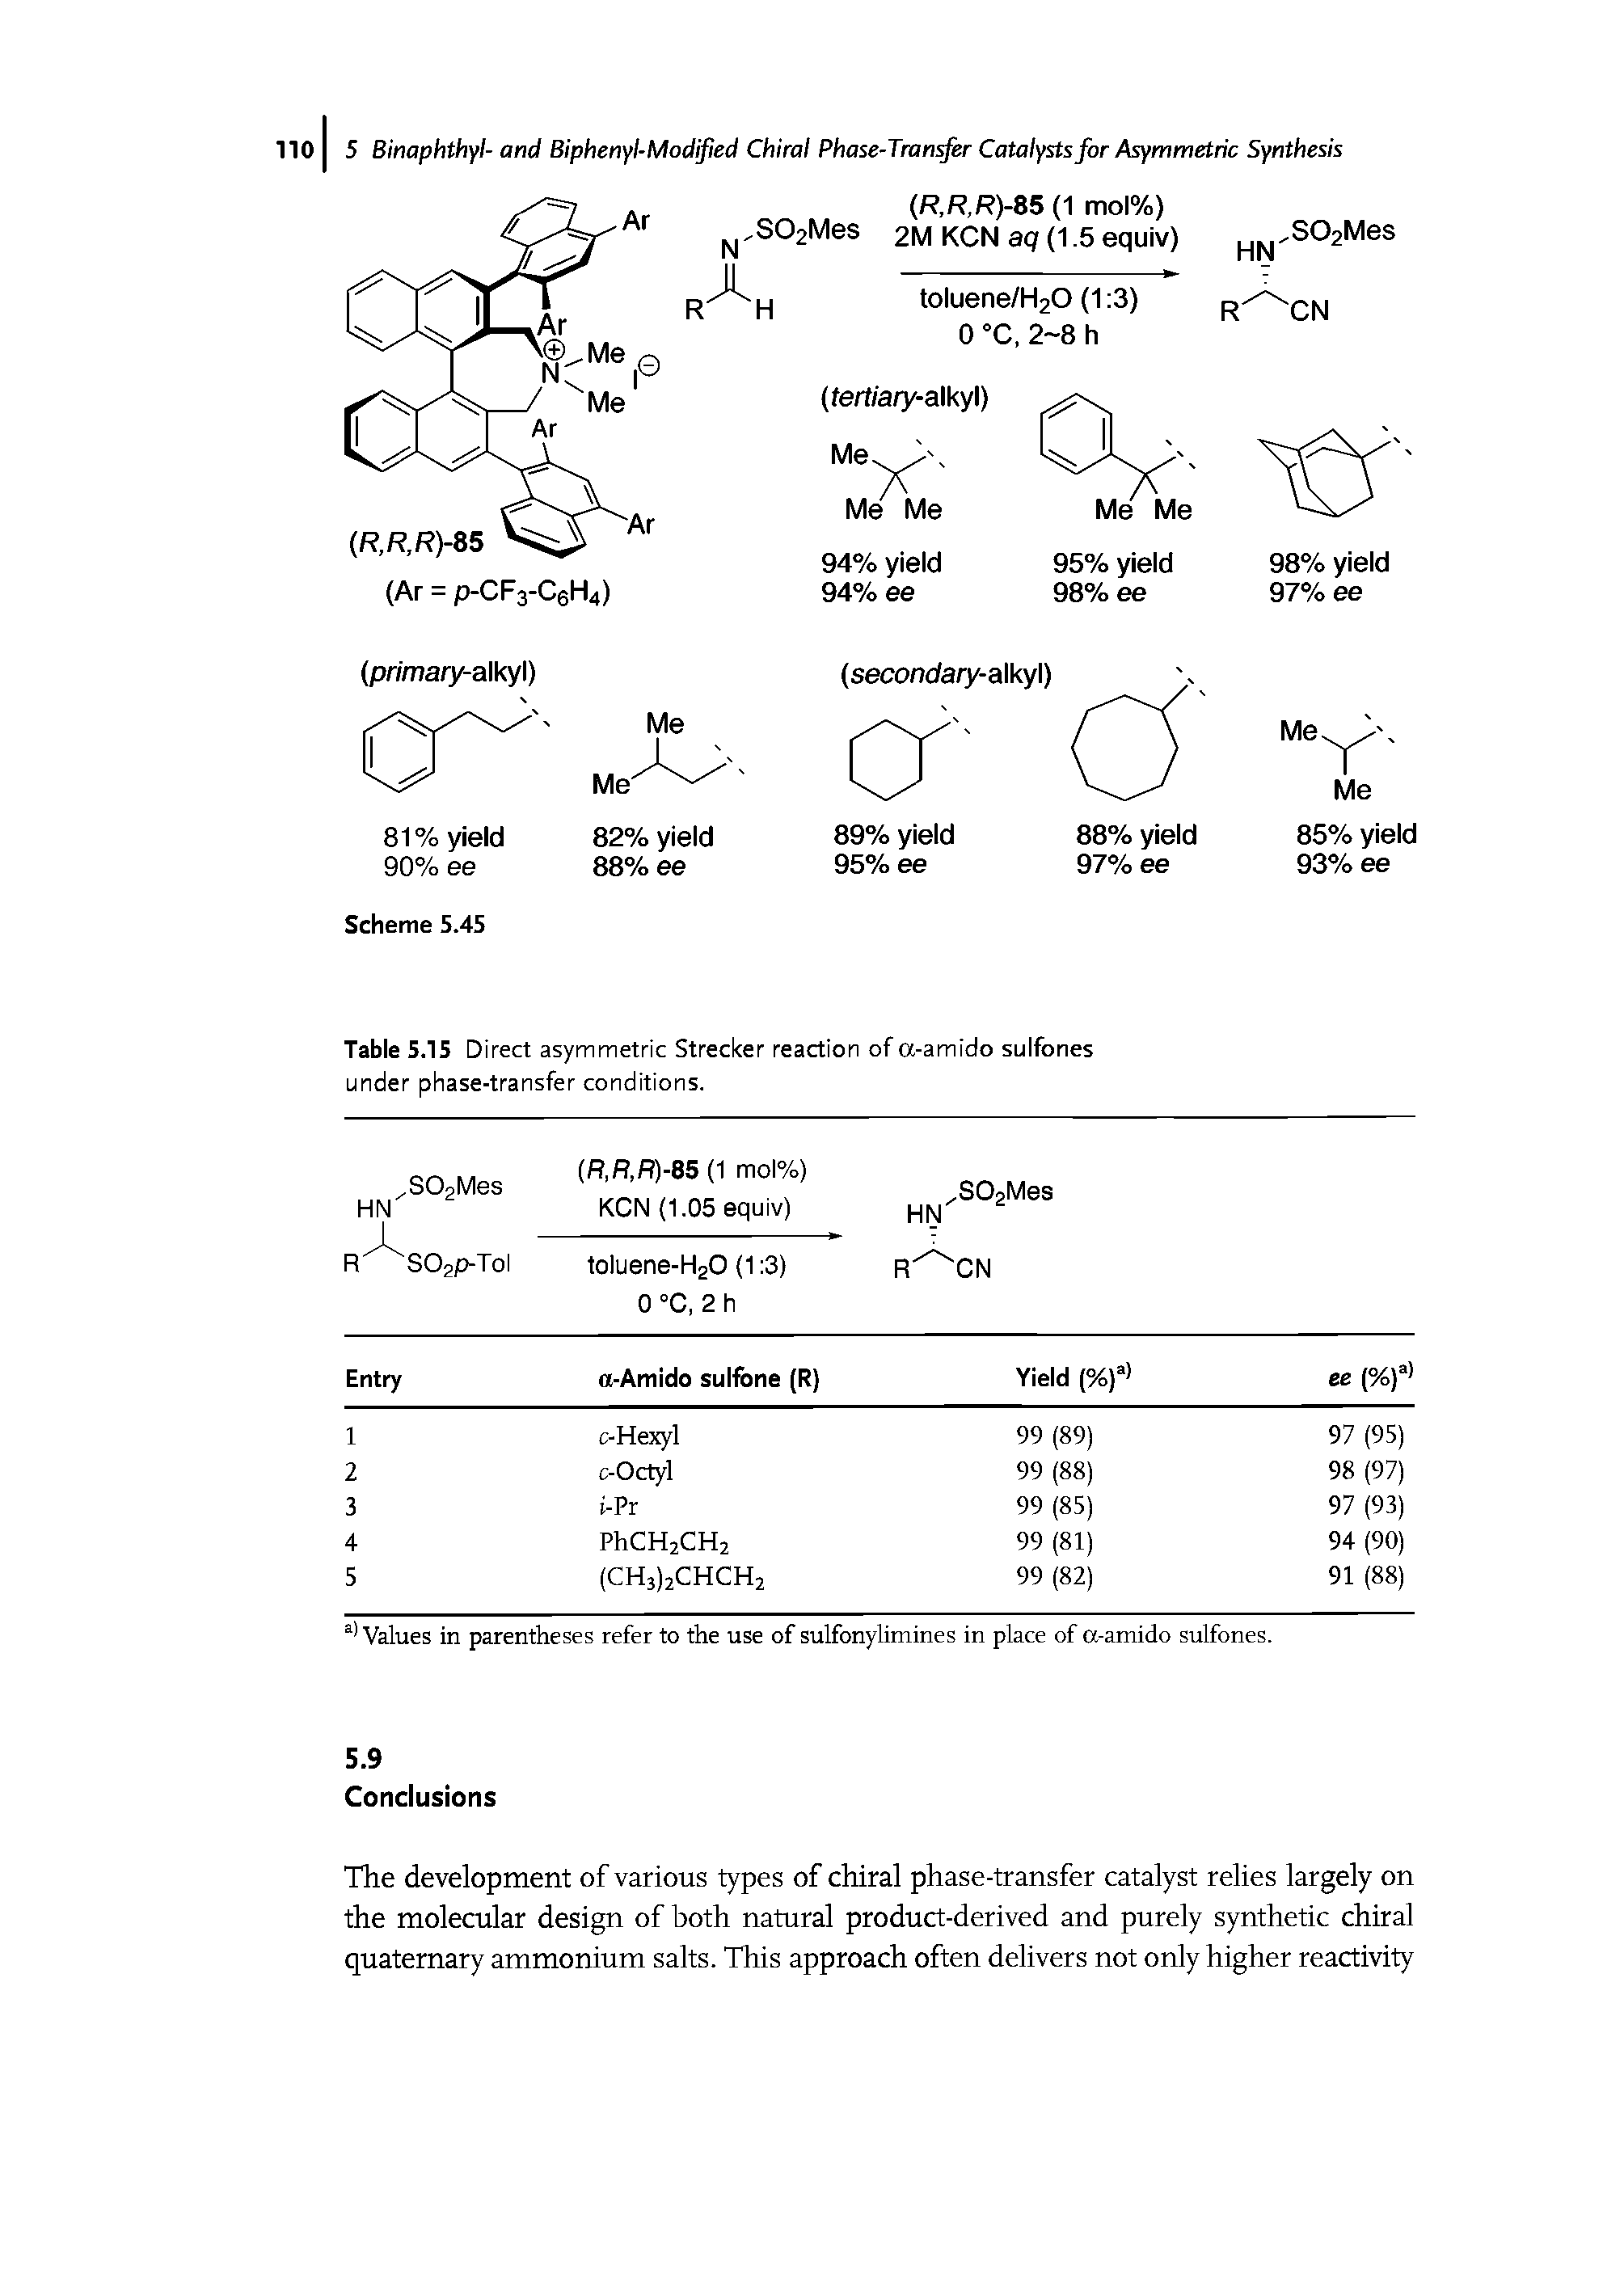 Table 5.15 Direct asymmetric Strecker reaction of a-amido sulfones under phase-transfer conditions.